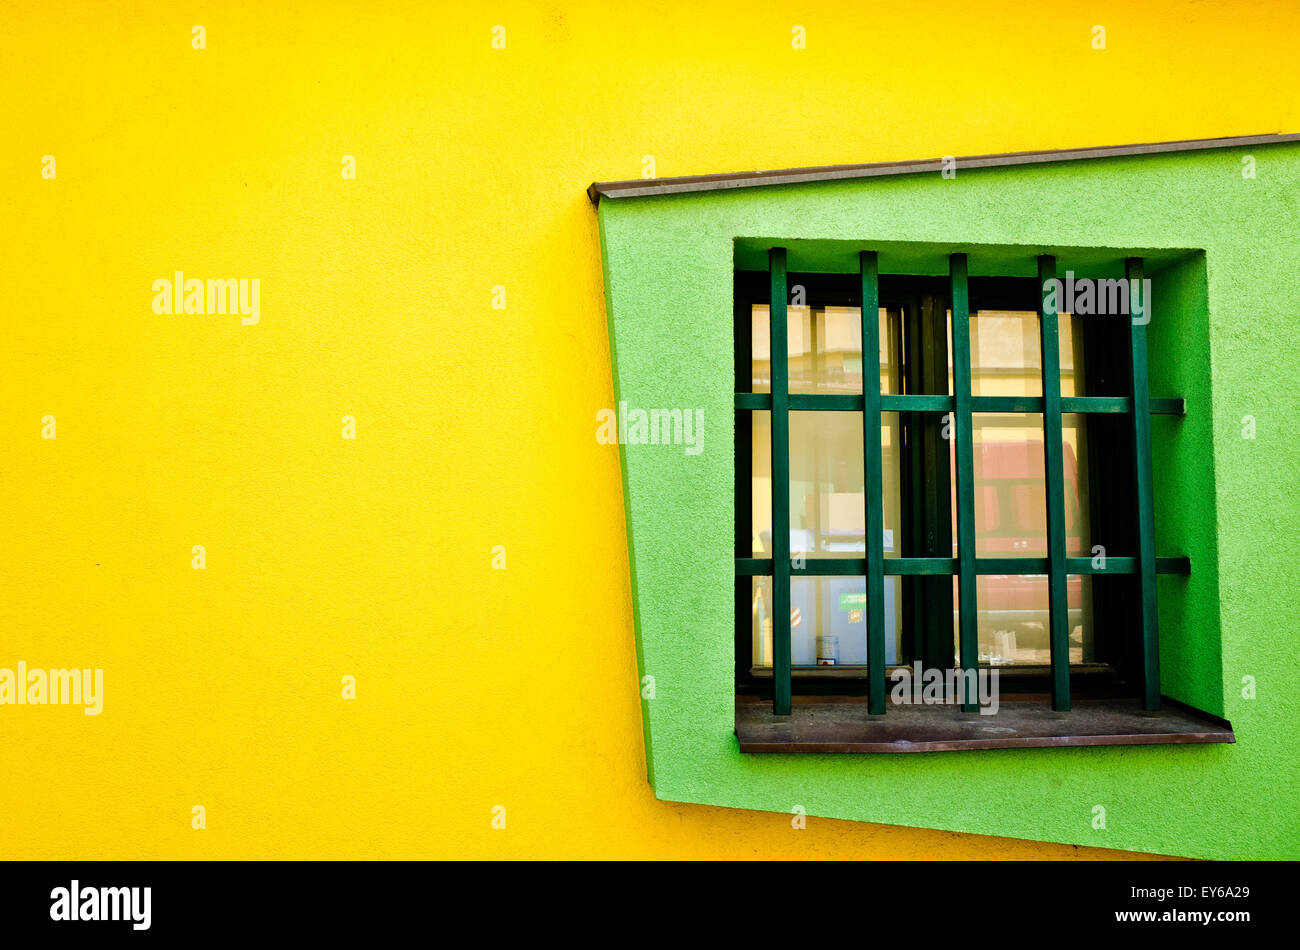 modern building in yellow walls and green windows Stock Photo